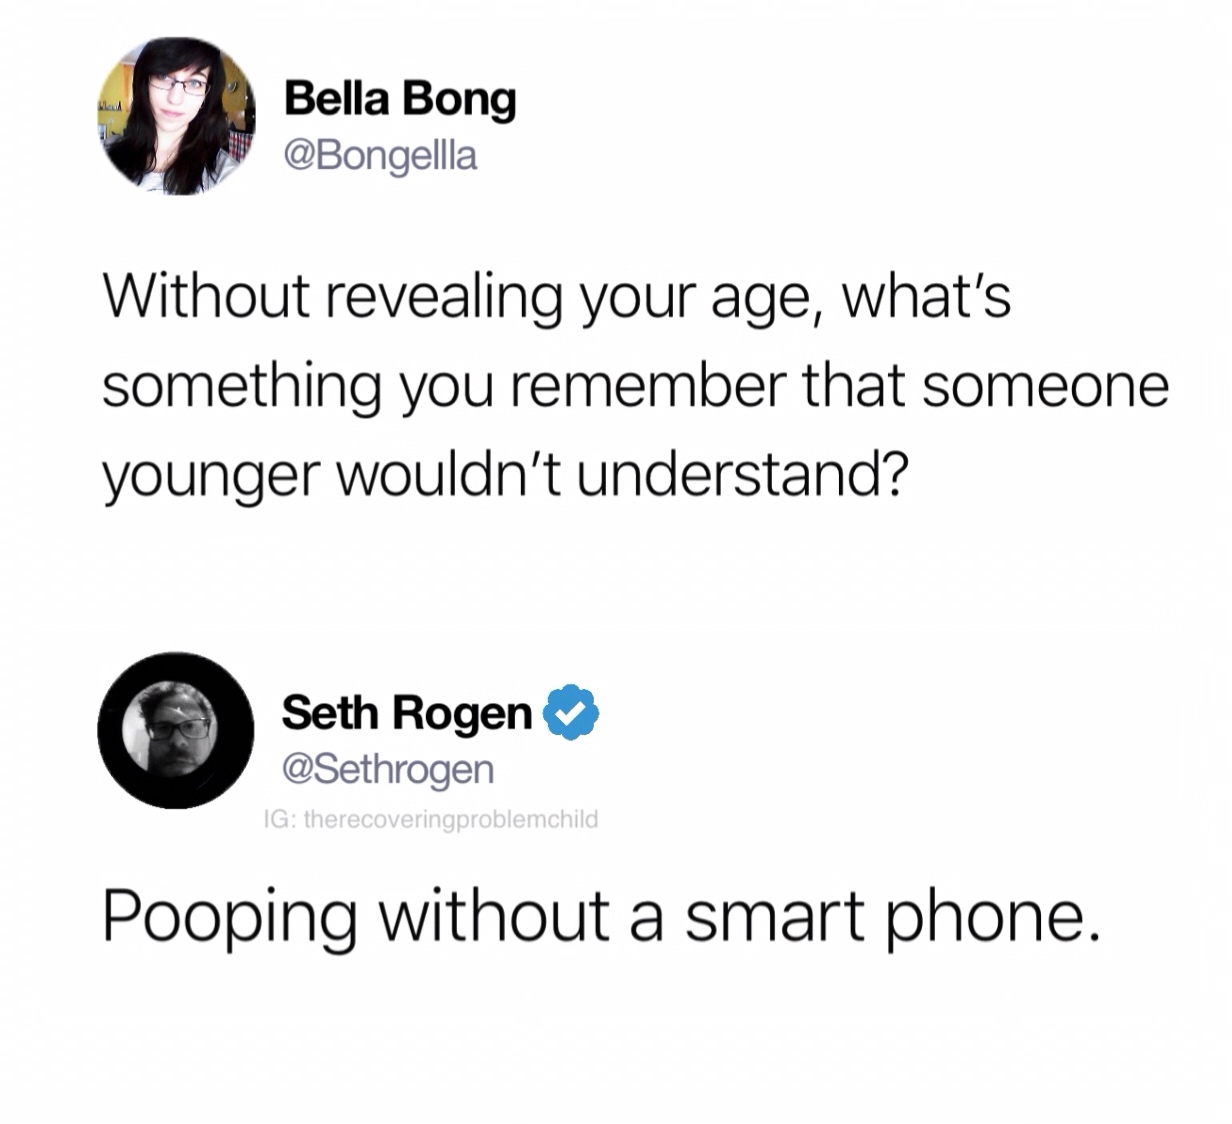 Seth Rogan tweets out joke about pooping without a smartphone as something that younger people wouldn't understand